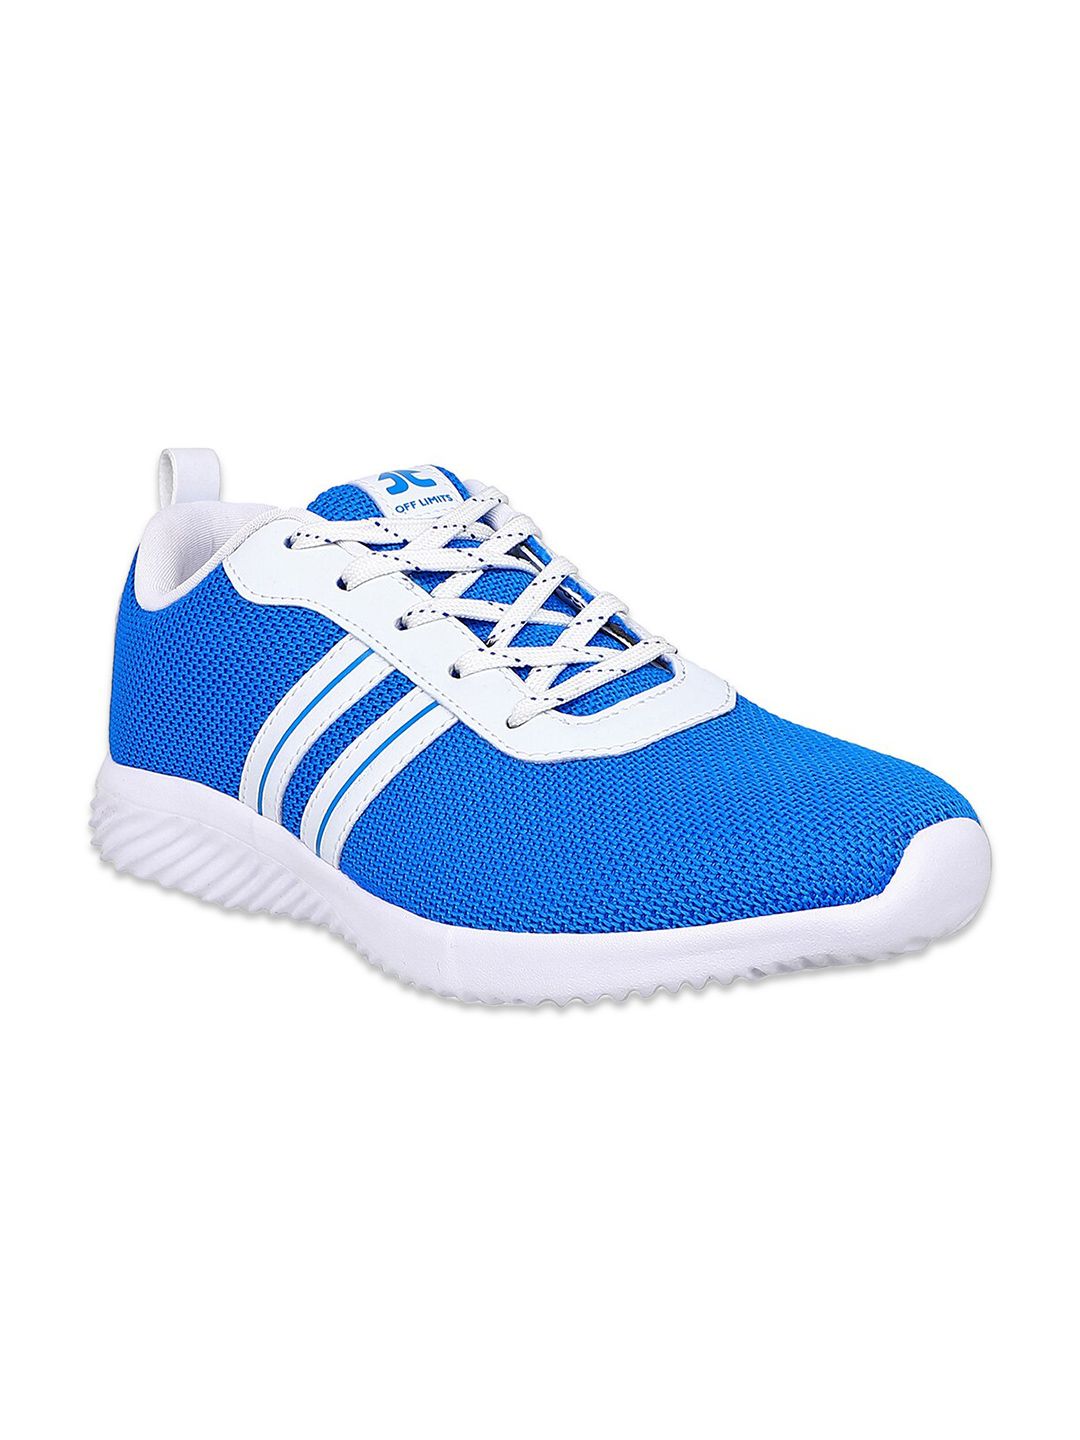 OFF LIMITS Women Blue Mesh Running Non-Marking Shoes Price in India